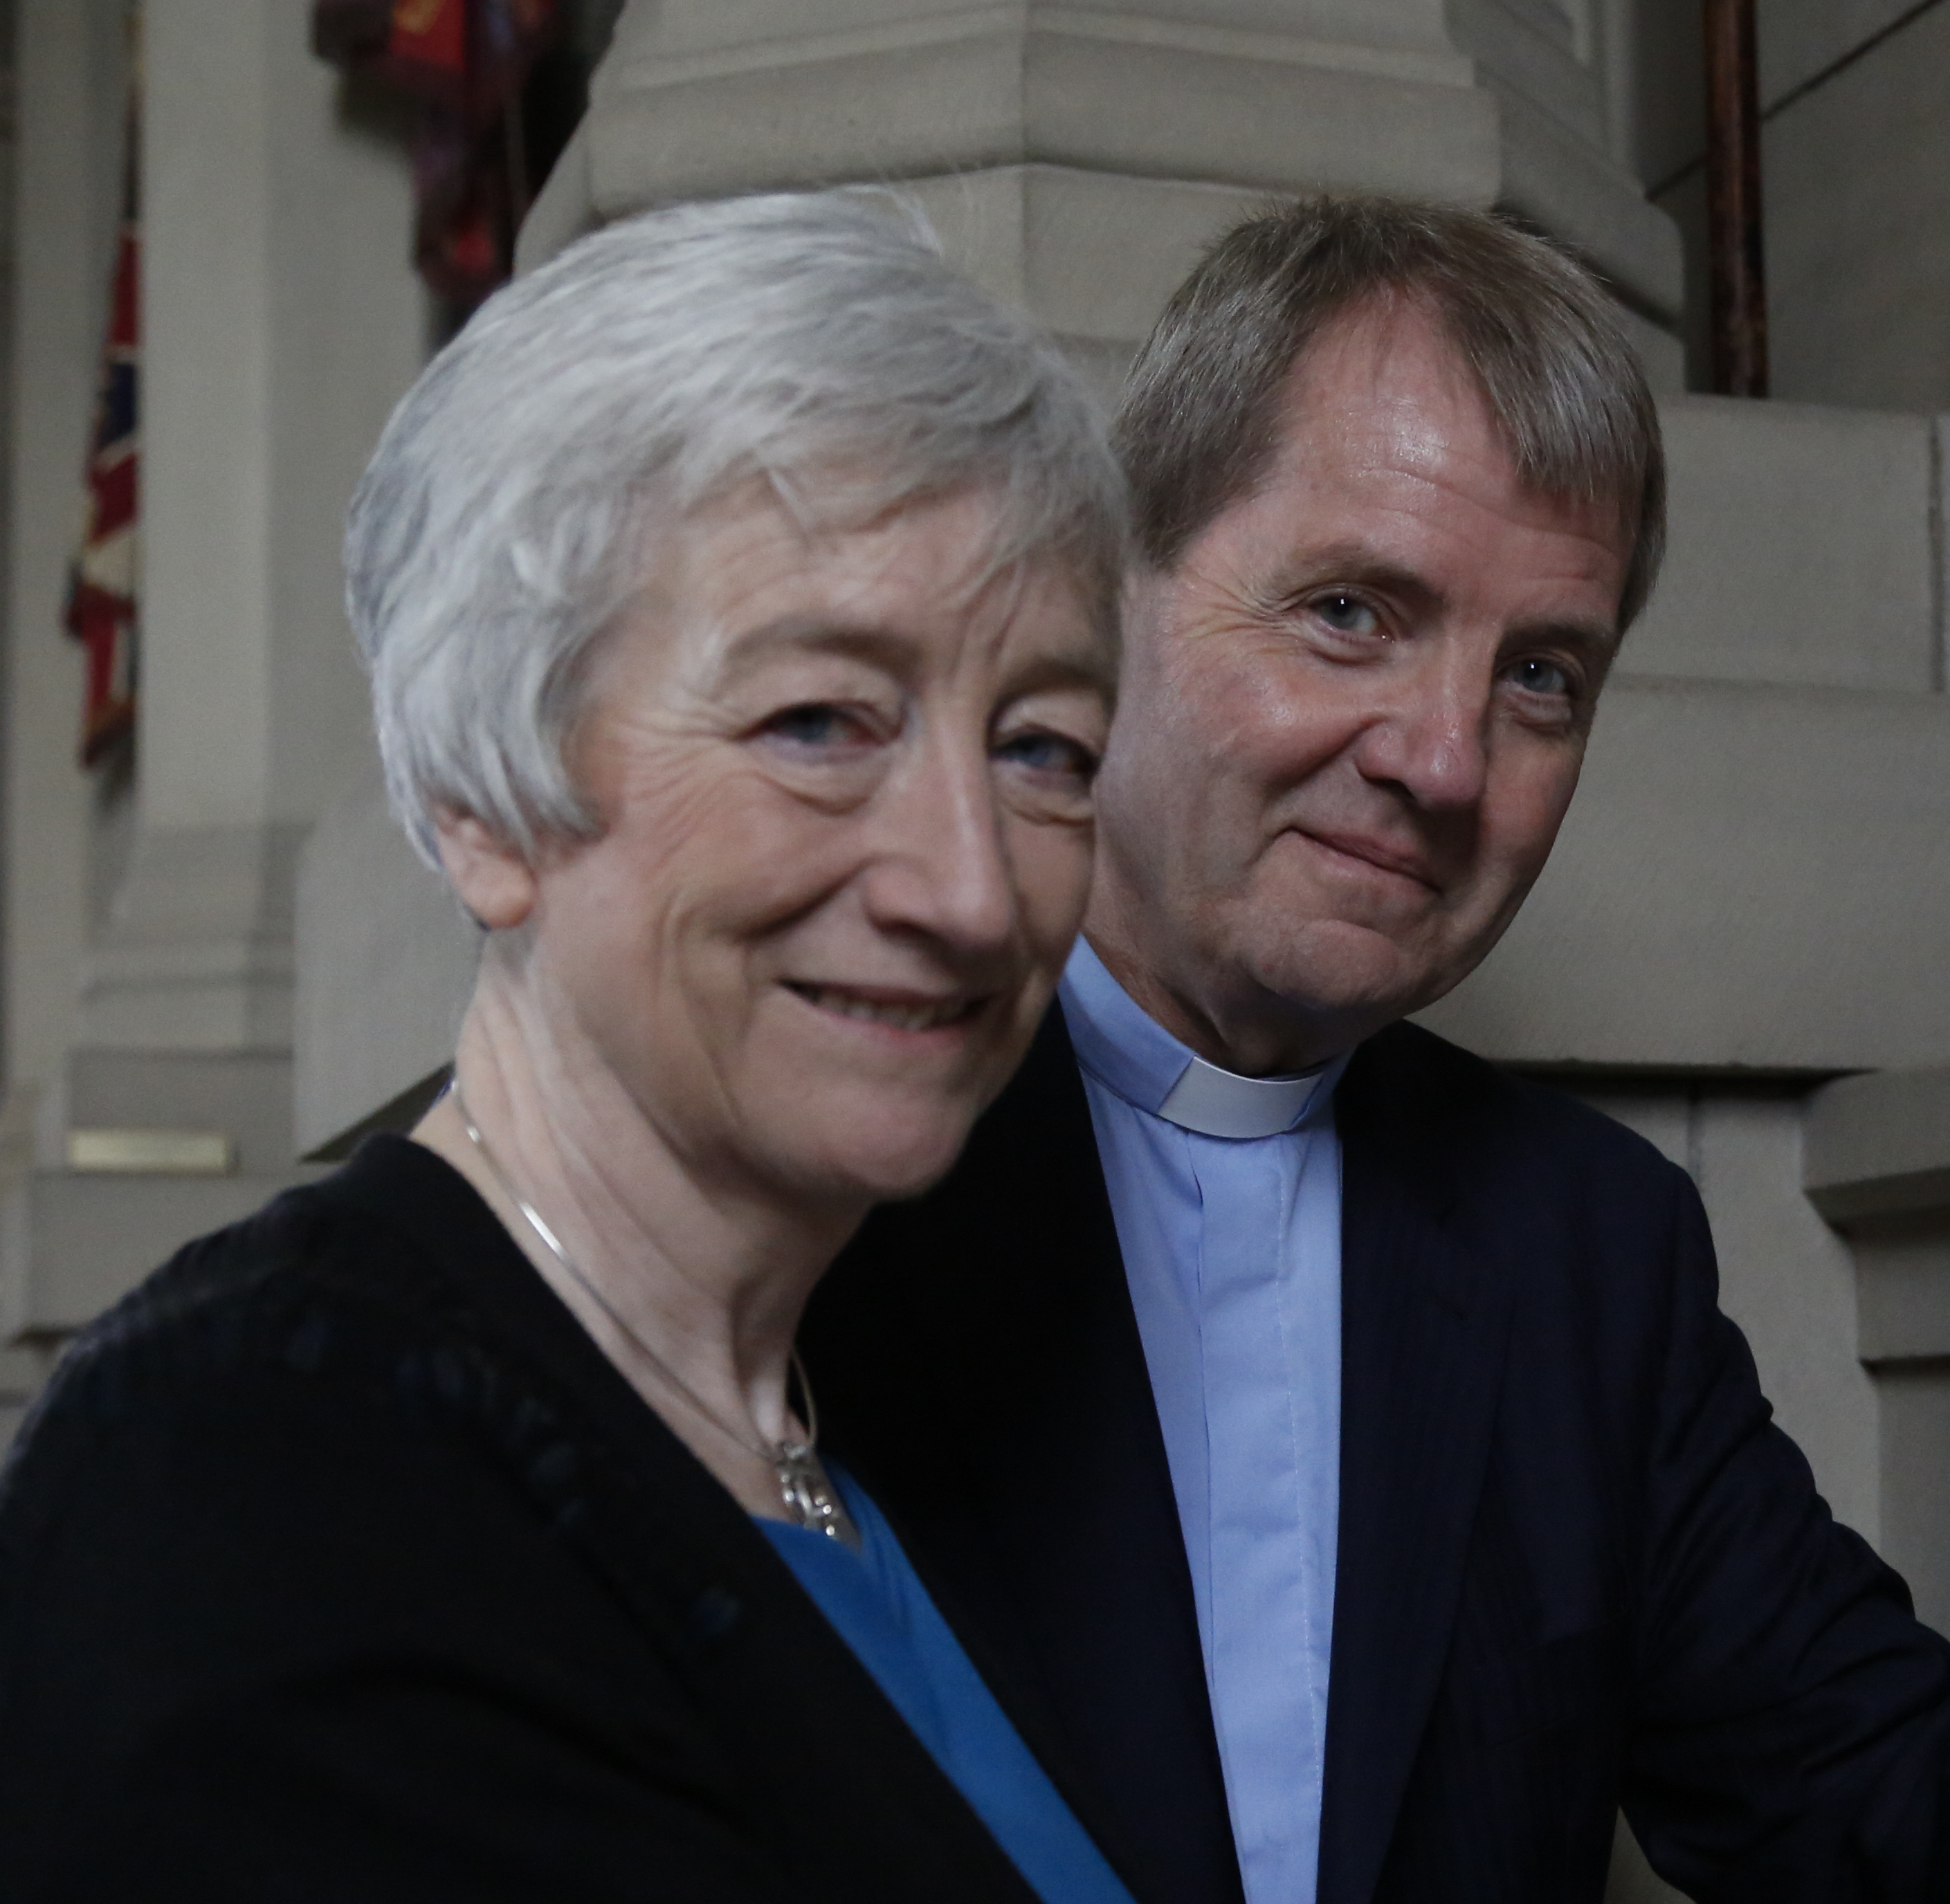 Barr (right) with his wife in 2017